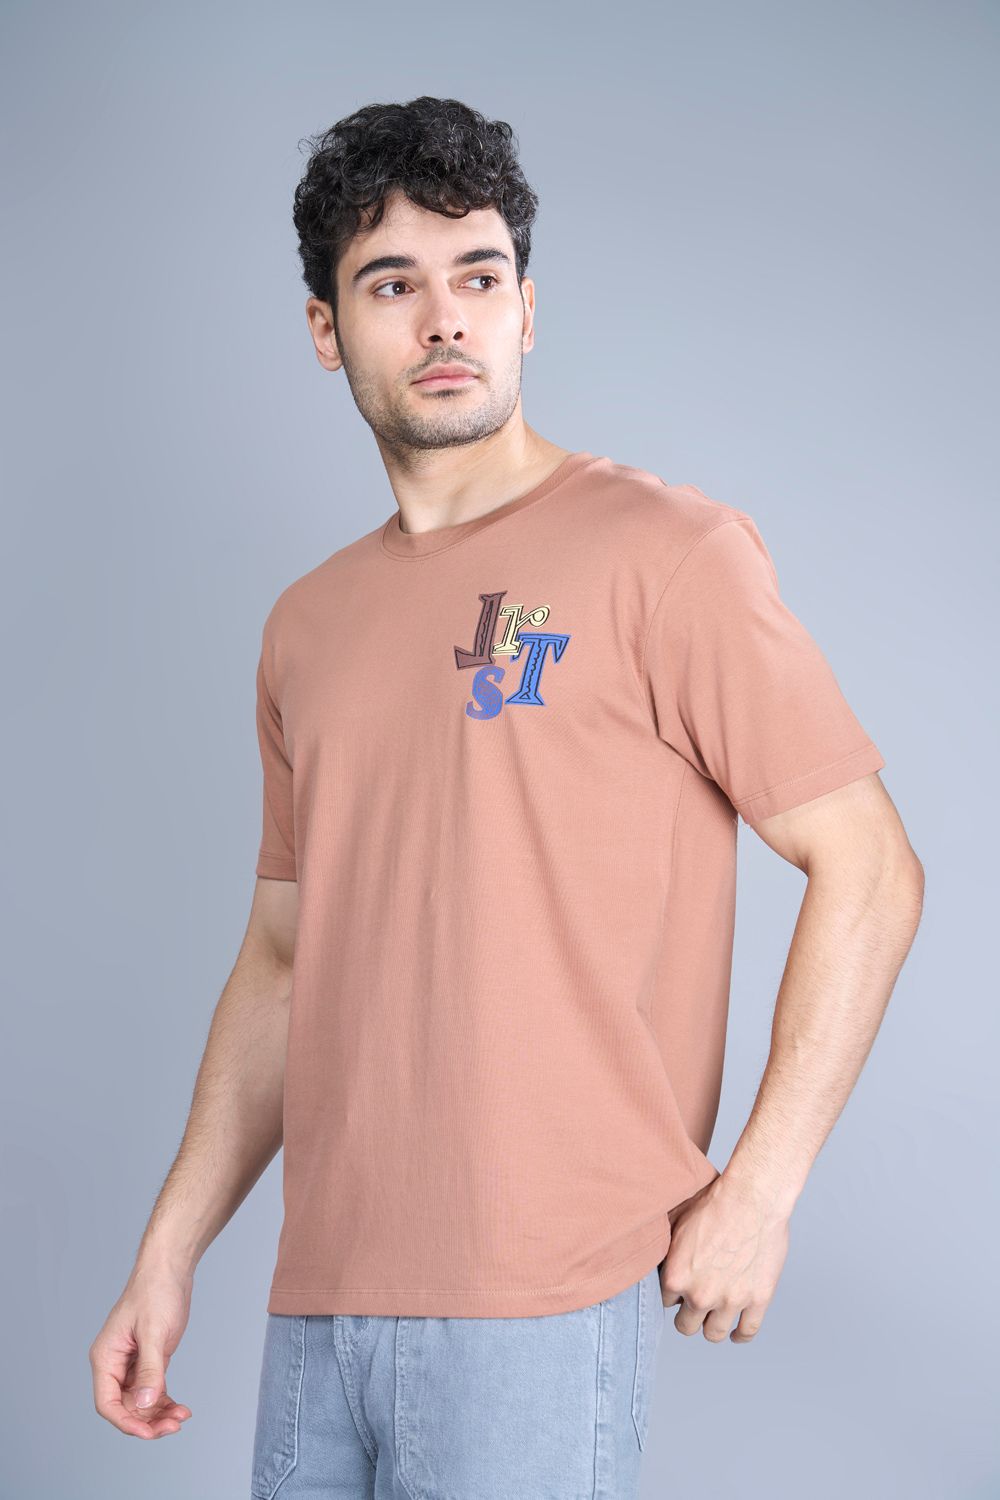 Cotton oversized T shirt for men in the solid color Café cream with half sleeves and crew neck, side view.